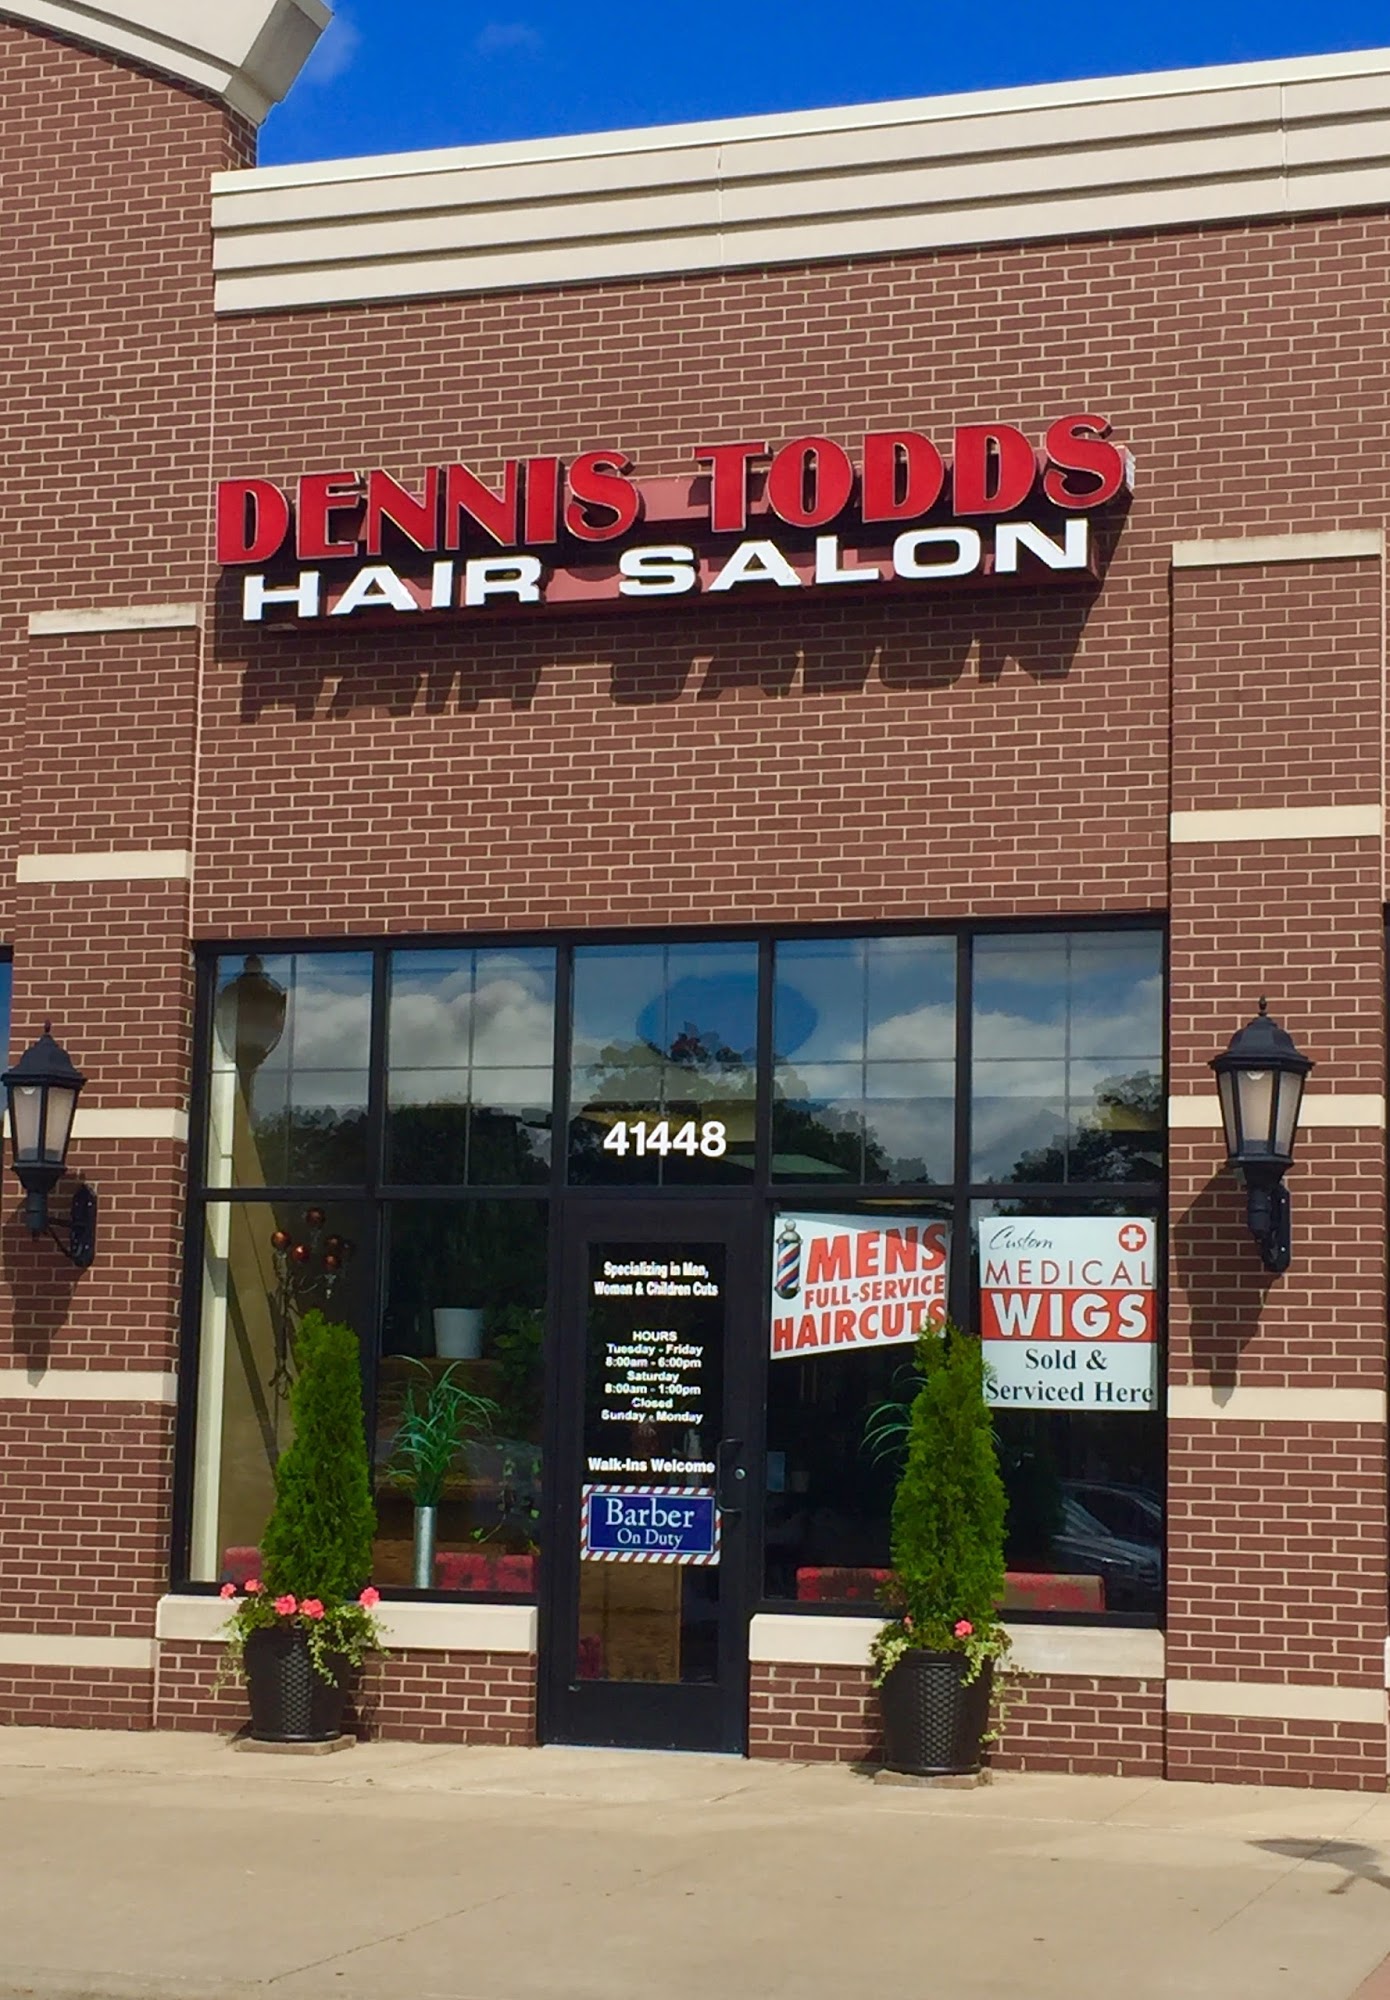 Dennis Todd's Hair Salon and Wigs